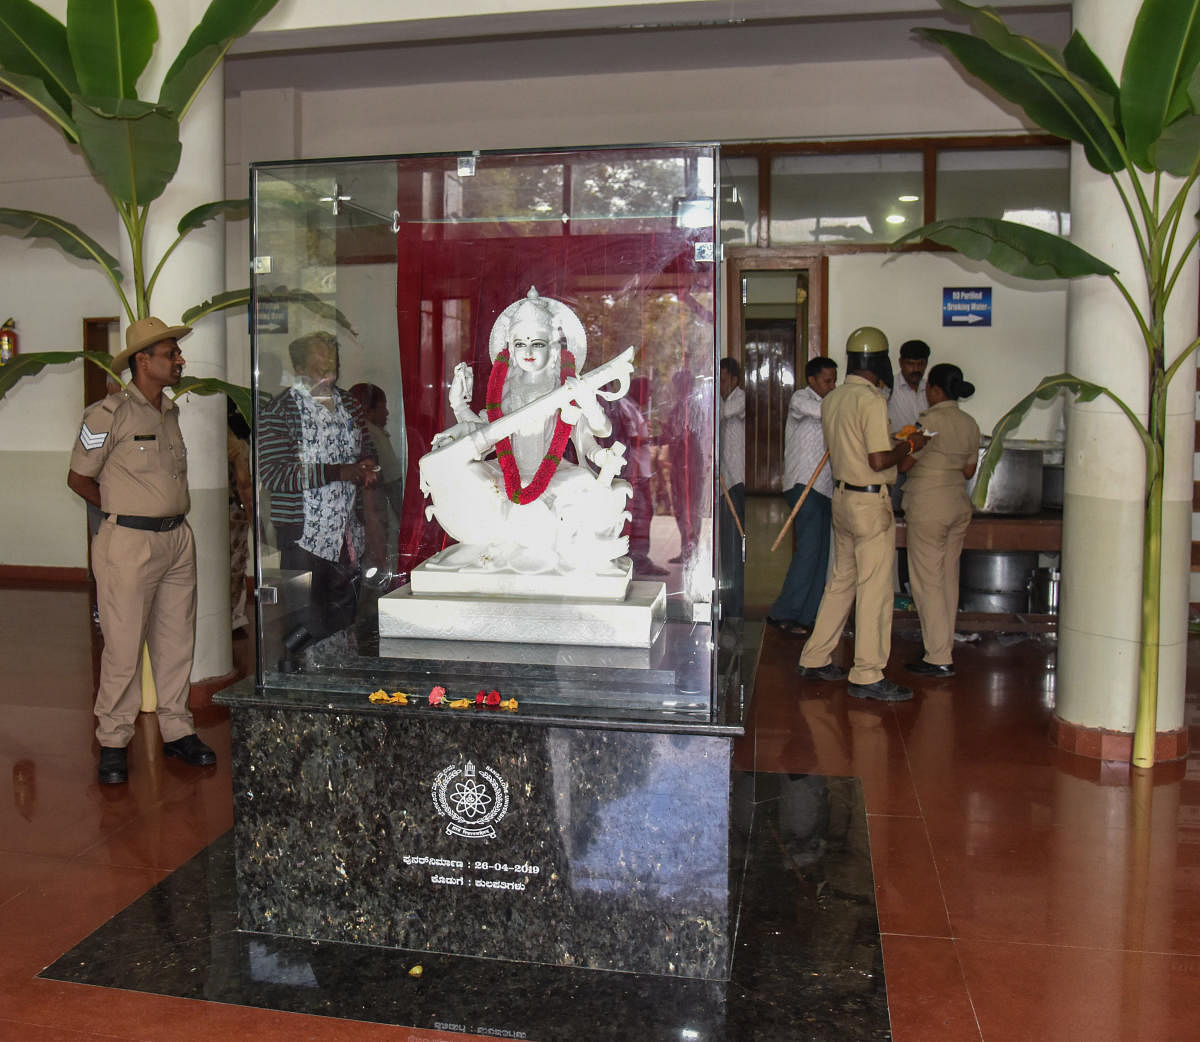 The idol was reinstalled around 5.50 am with the vice chancellor, registrar, finance officer and other senior faculty and non-teaching staff in attendance.